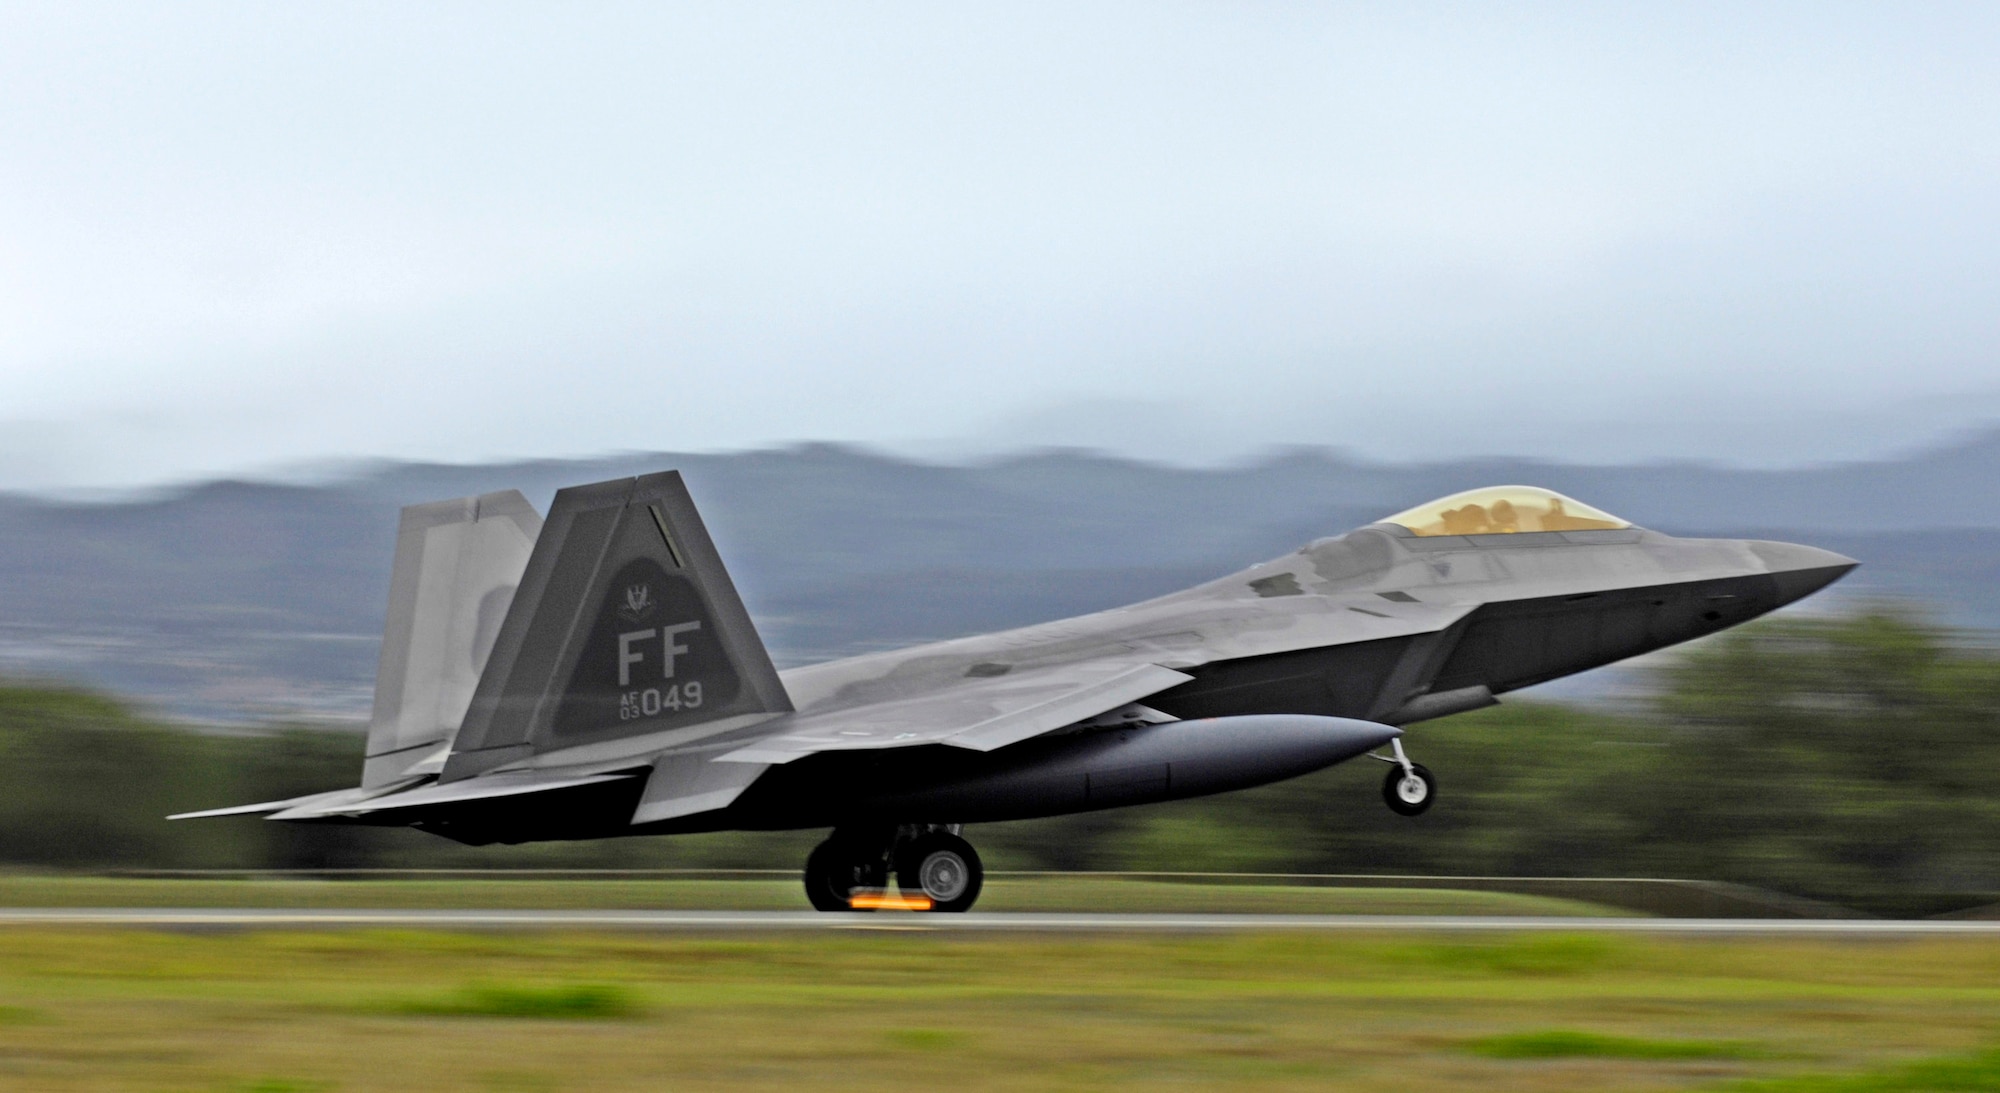 The first of 12 F-22 Raptors lands for a brief layover Feb. 7 at Hickam Air Force Base, Hawaii. The F-22s and more than 250 Airmen from the 27th Fighter Squadron at Langley Air Force Base, Va., are bound for Kadena Air Base, Japan, for the aircaft's first overseas operational deployment. (U.S. Air Force photo/Tech. Sgt. Shane A. Cuomo) 